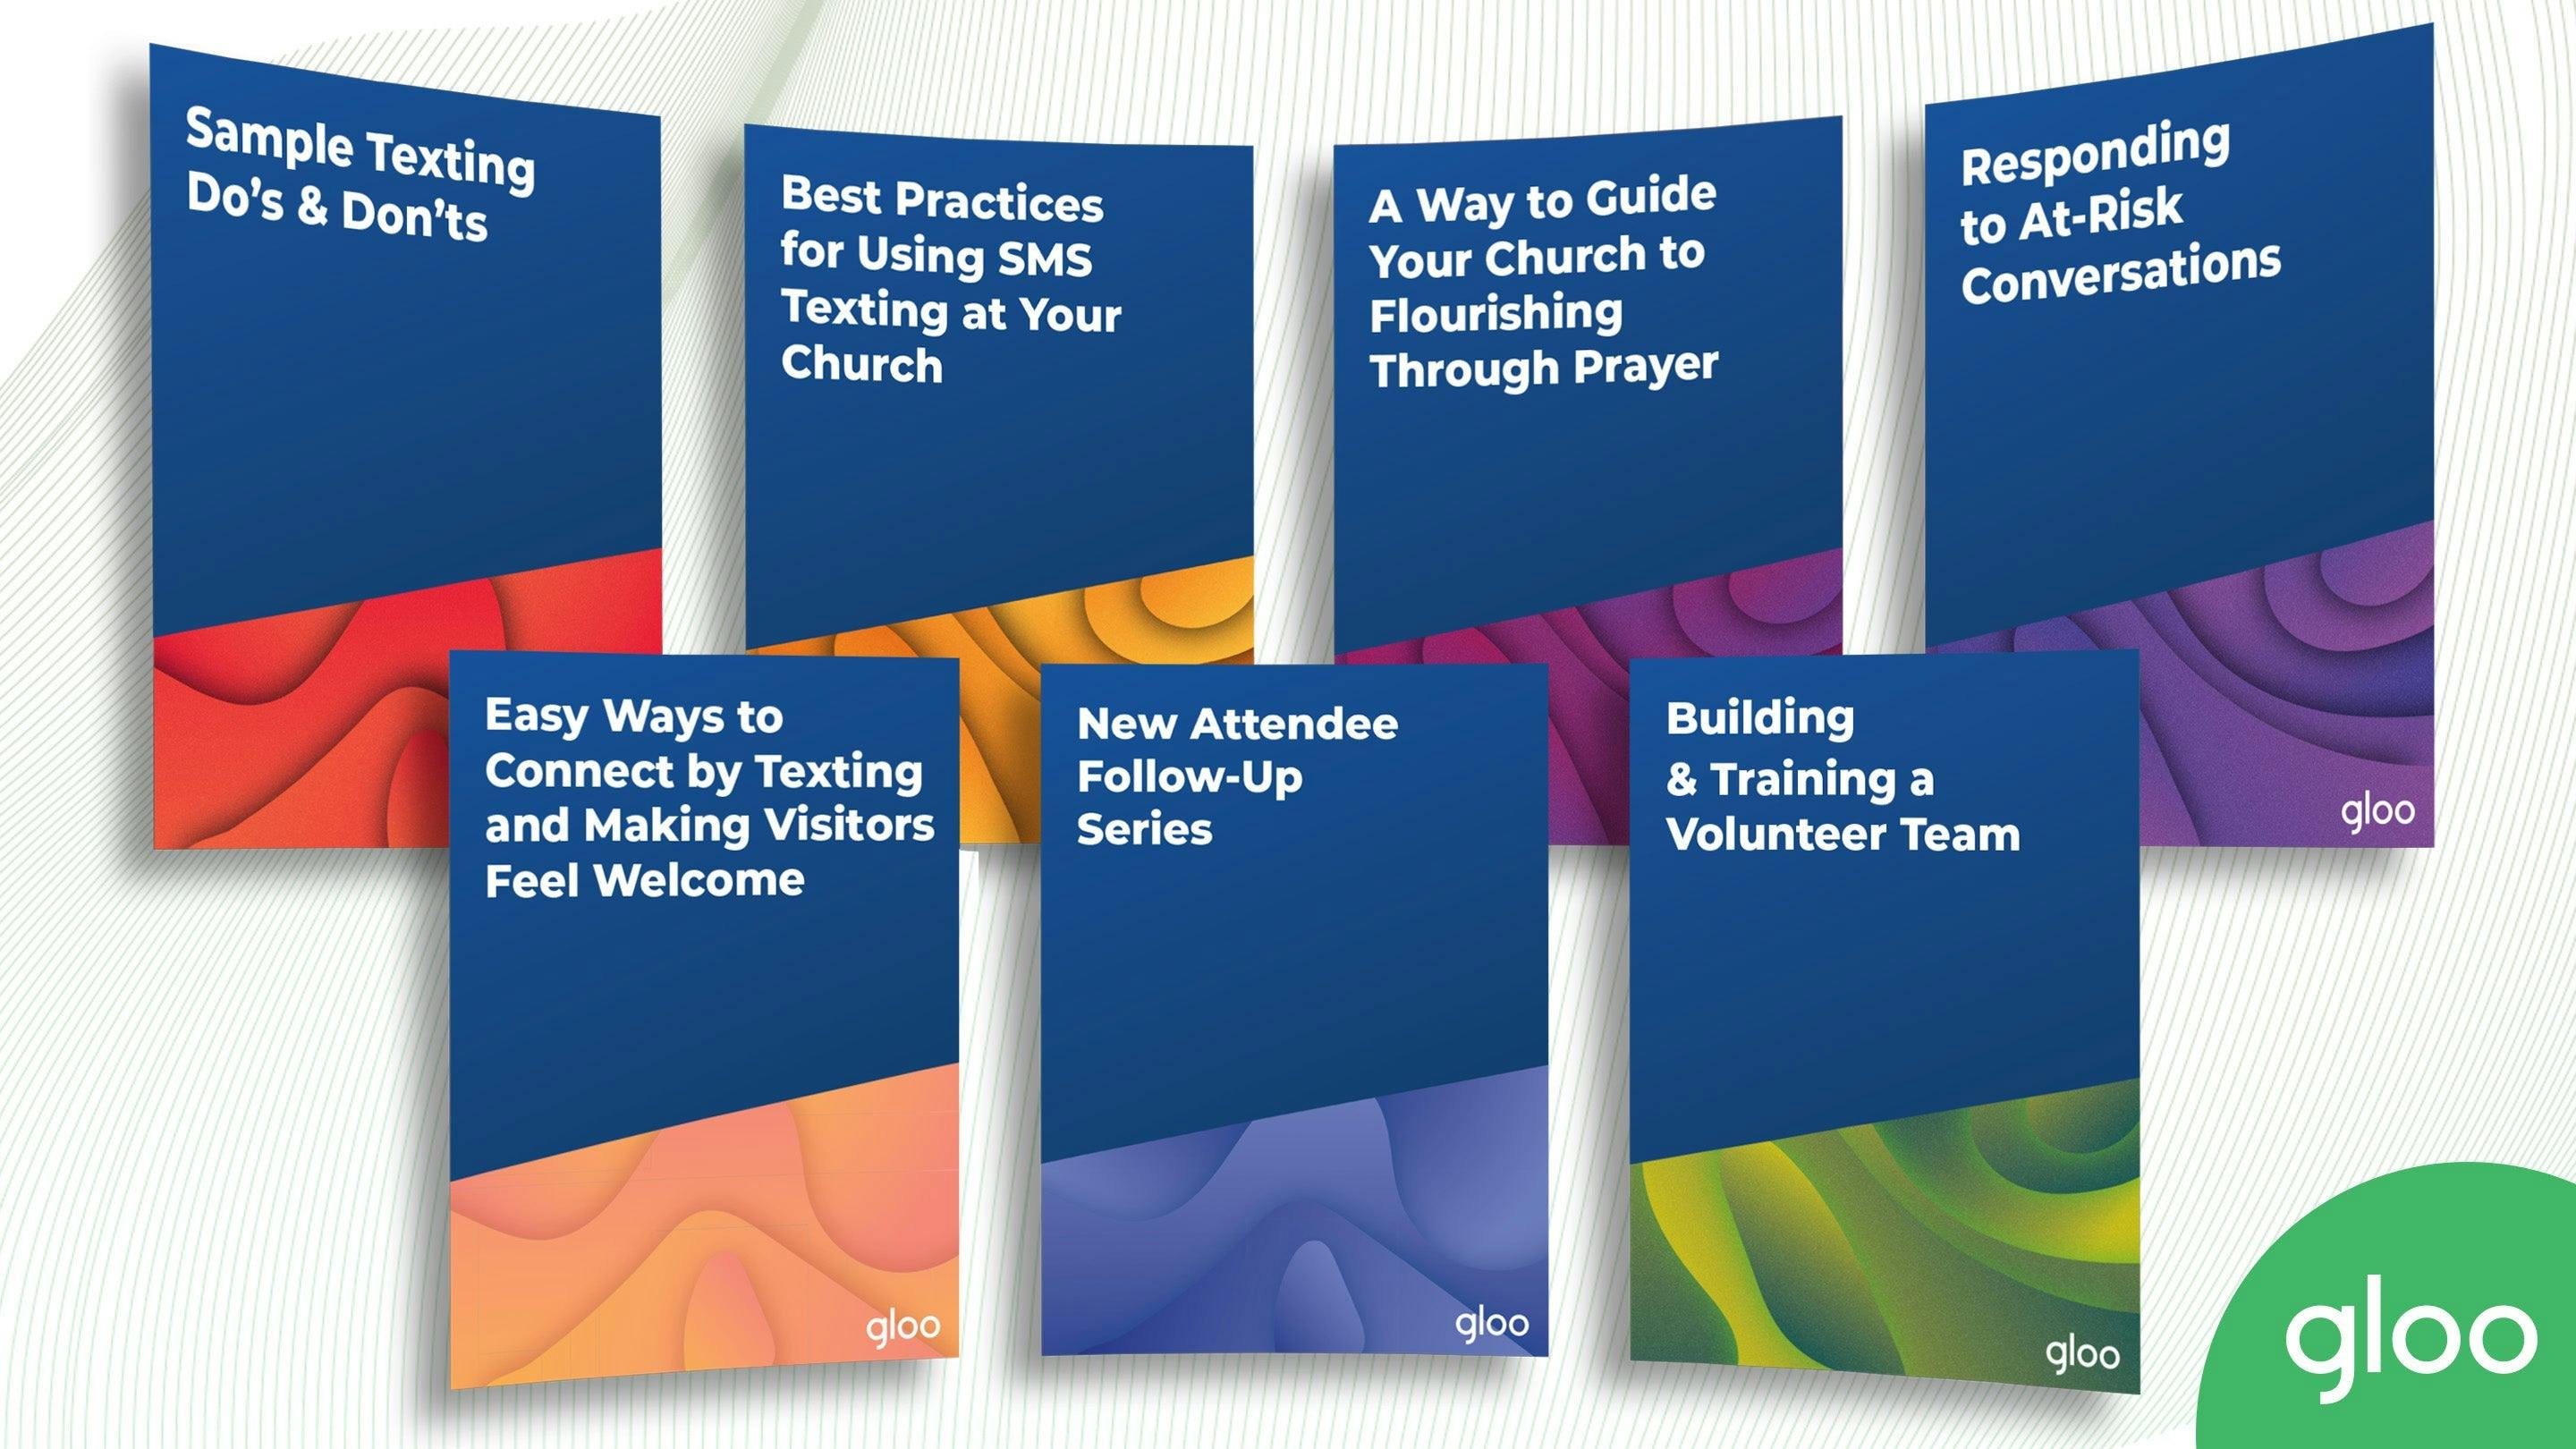 Gloo's Complete Texting Toolkit: Best Texting Practices for Your Church